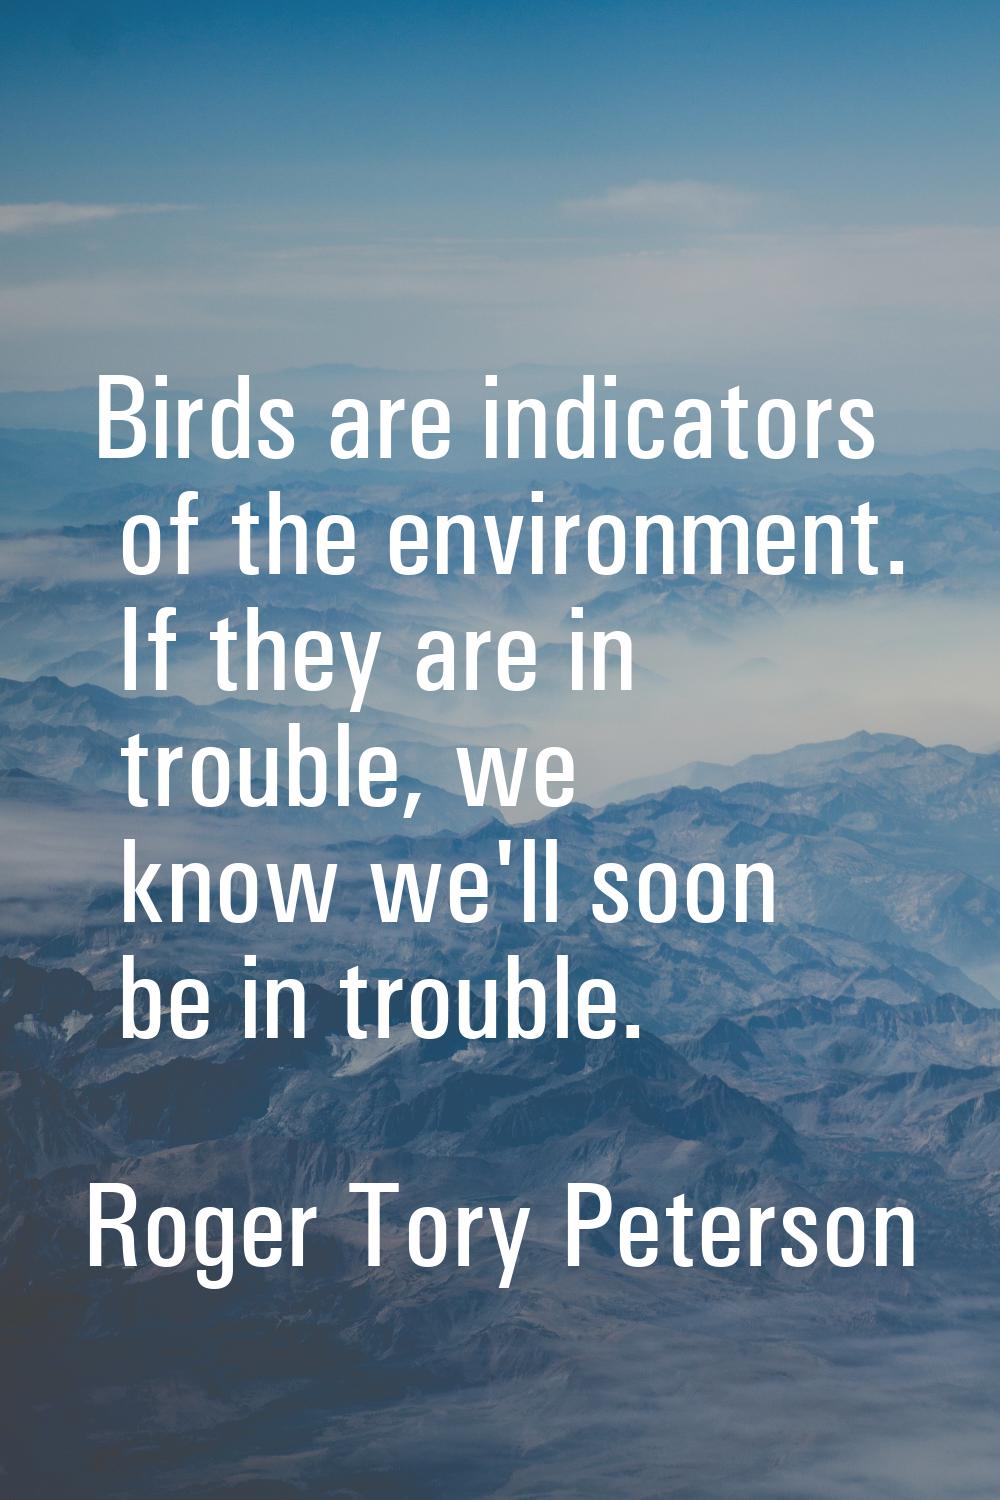 Birds are indicators of the environment. If they are in trouble, we know we'll soon be in trouble.